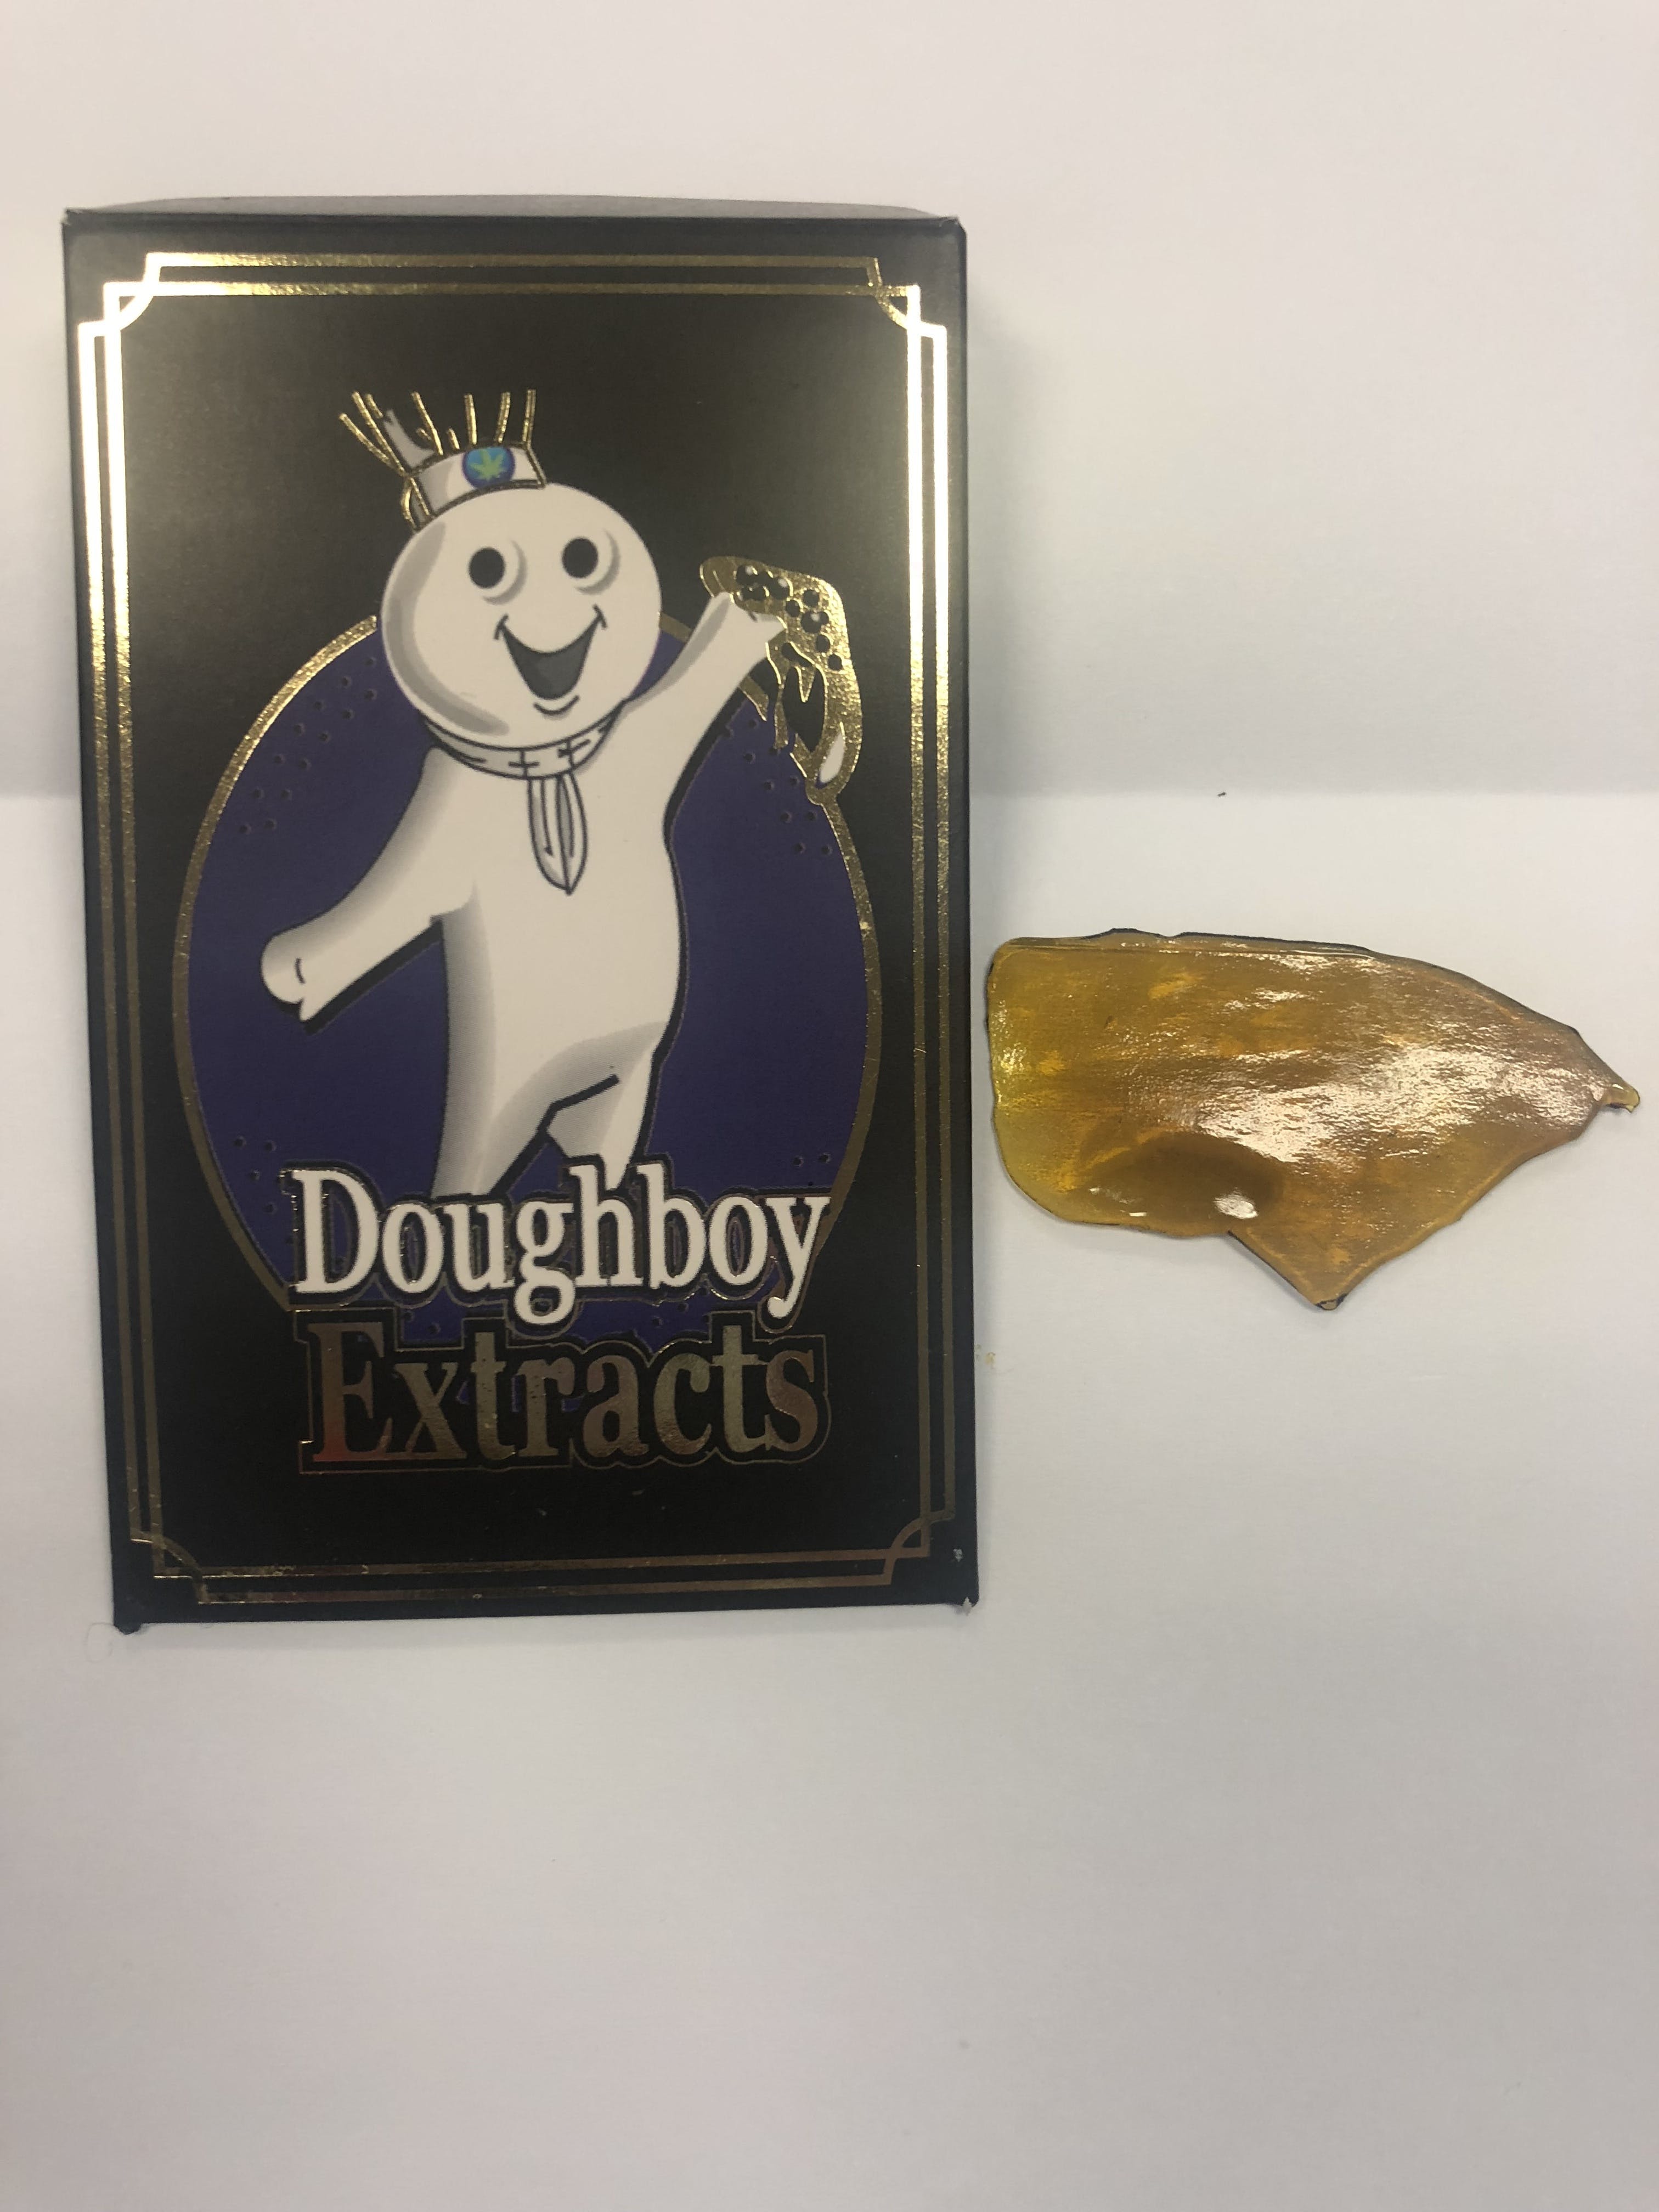 wax-doughboy-extracts-2-4035